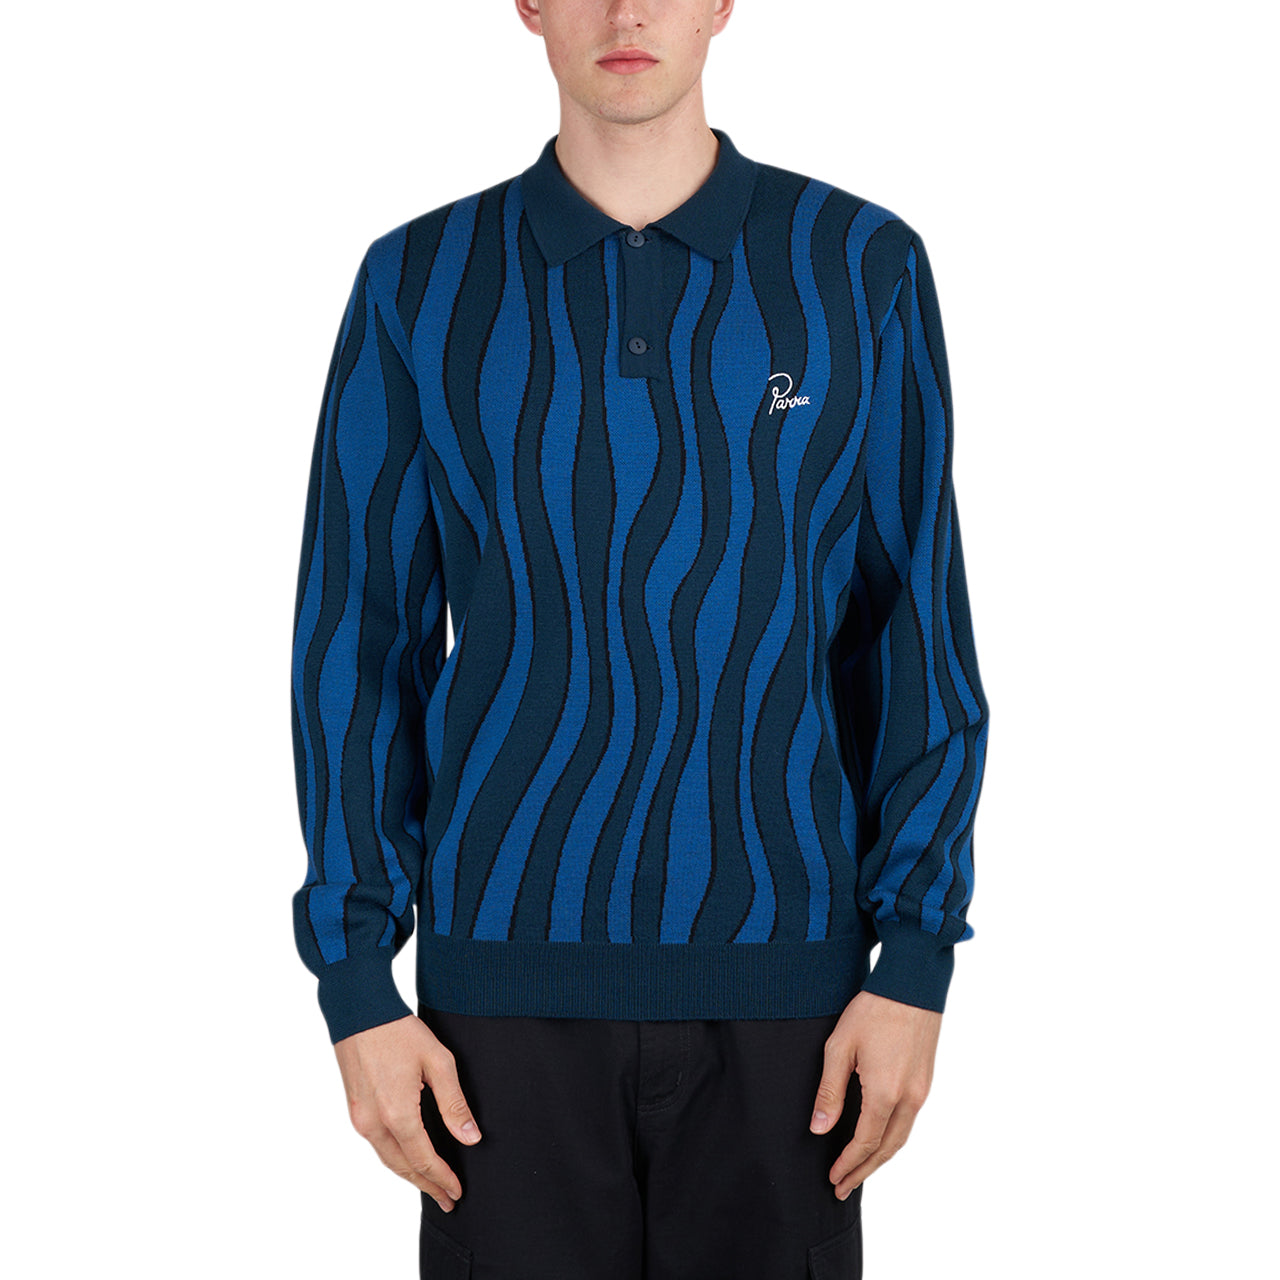 Parra Aqua Weed Waves Store Shirt Polo - Allike 49230 Knitted (Multi)